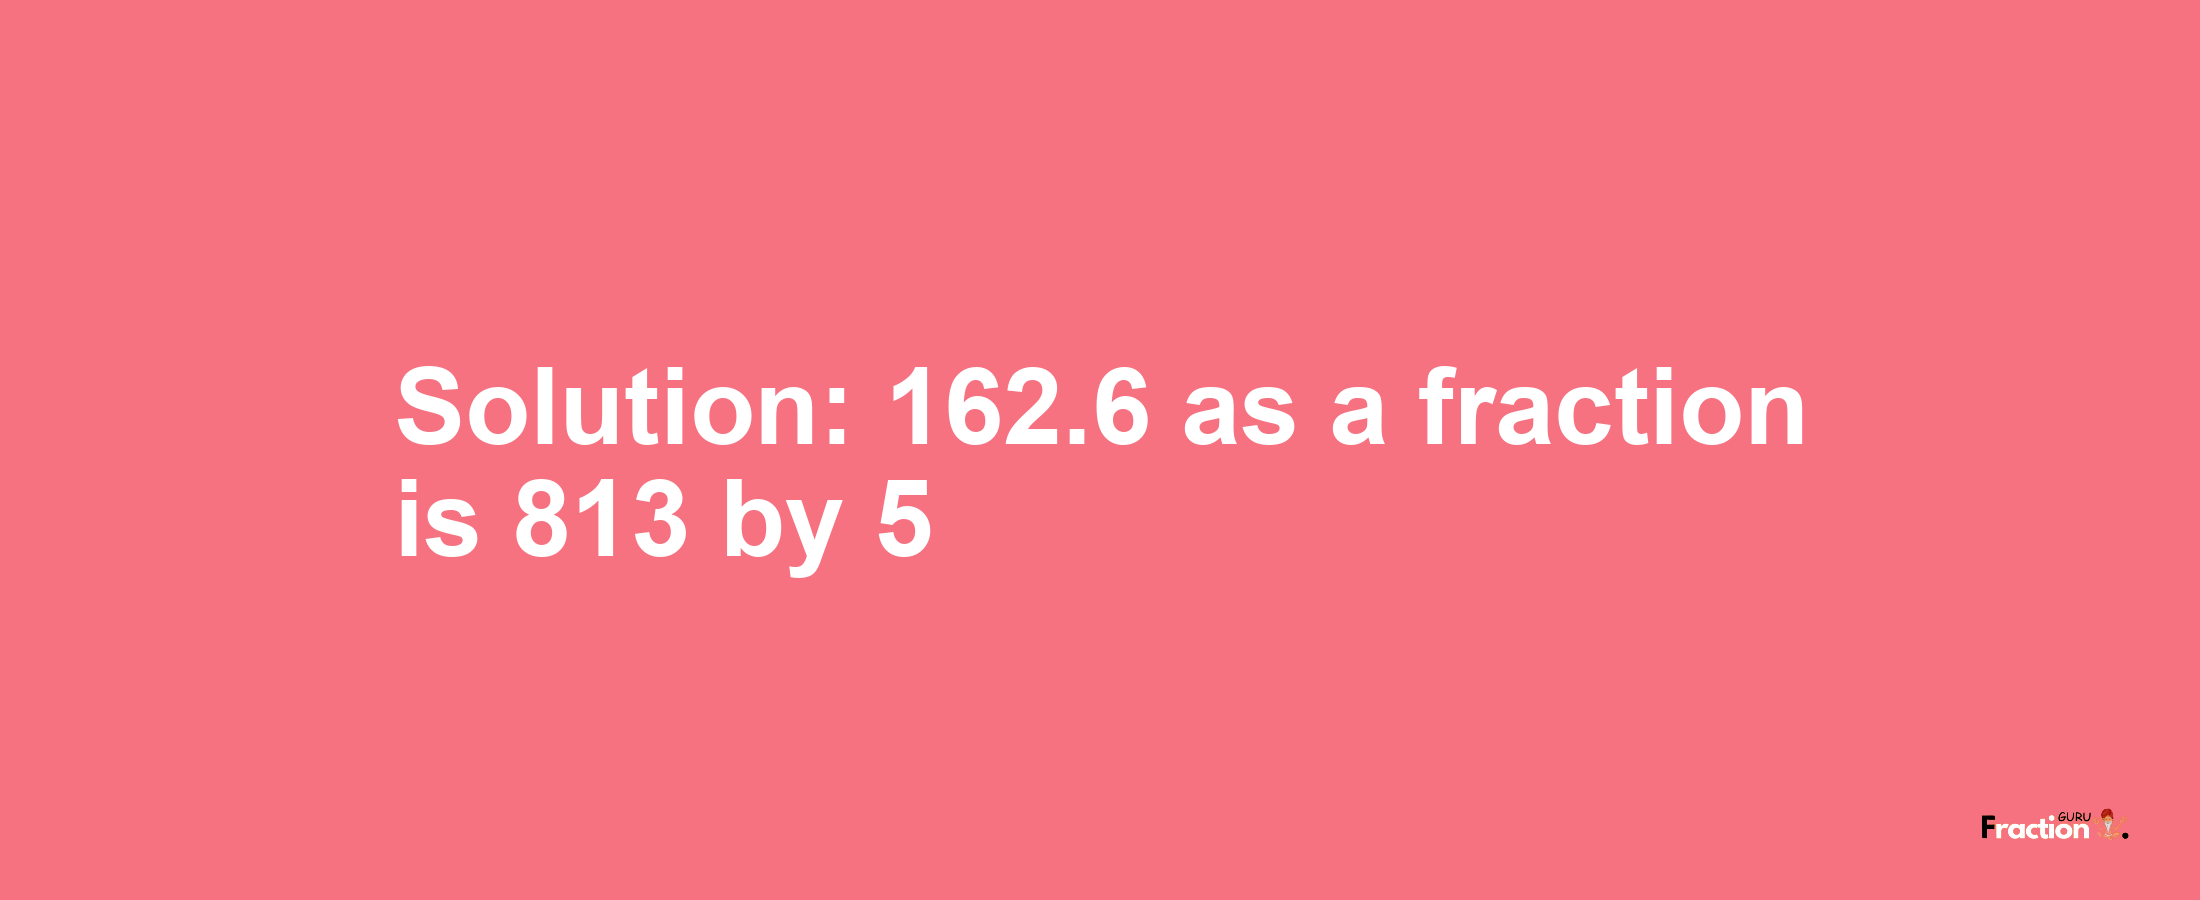 Solution:162.6 as a fraction is 813/5